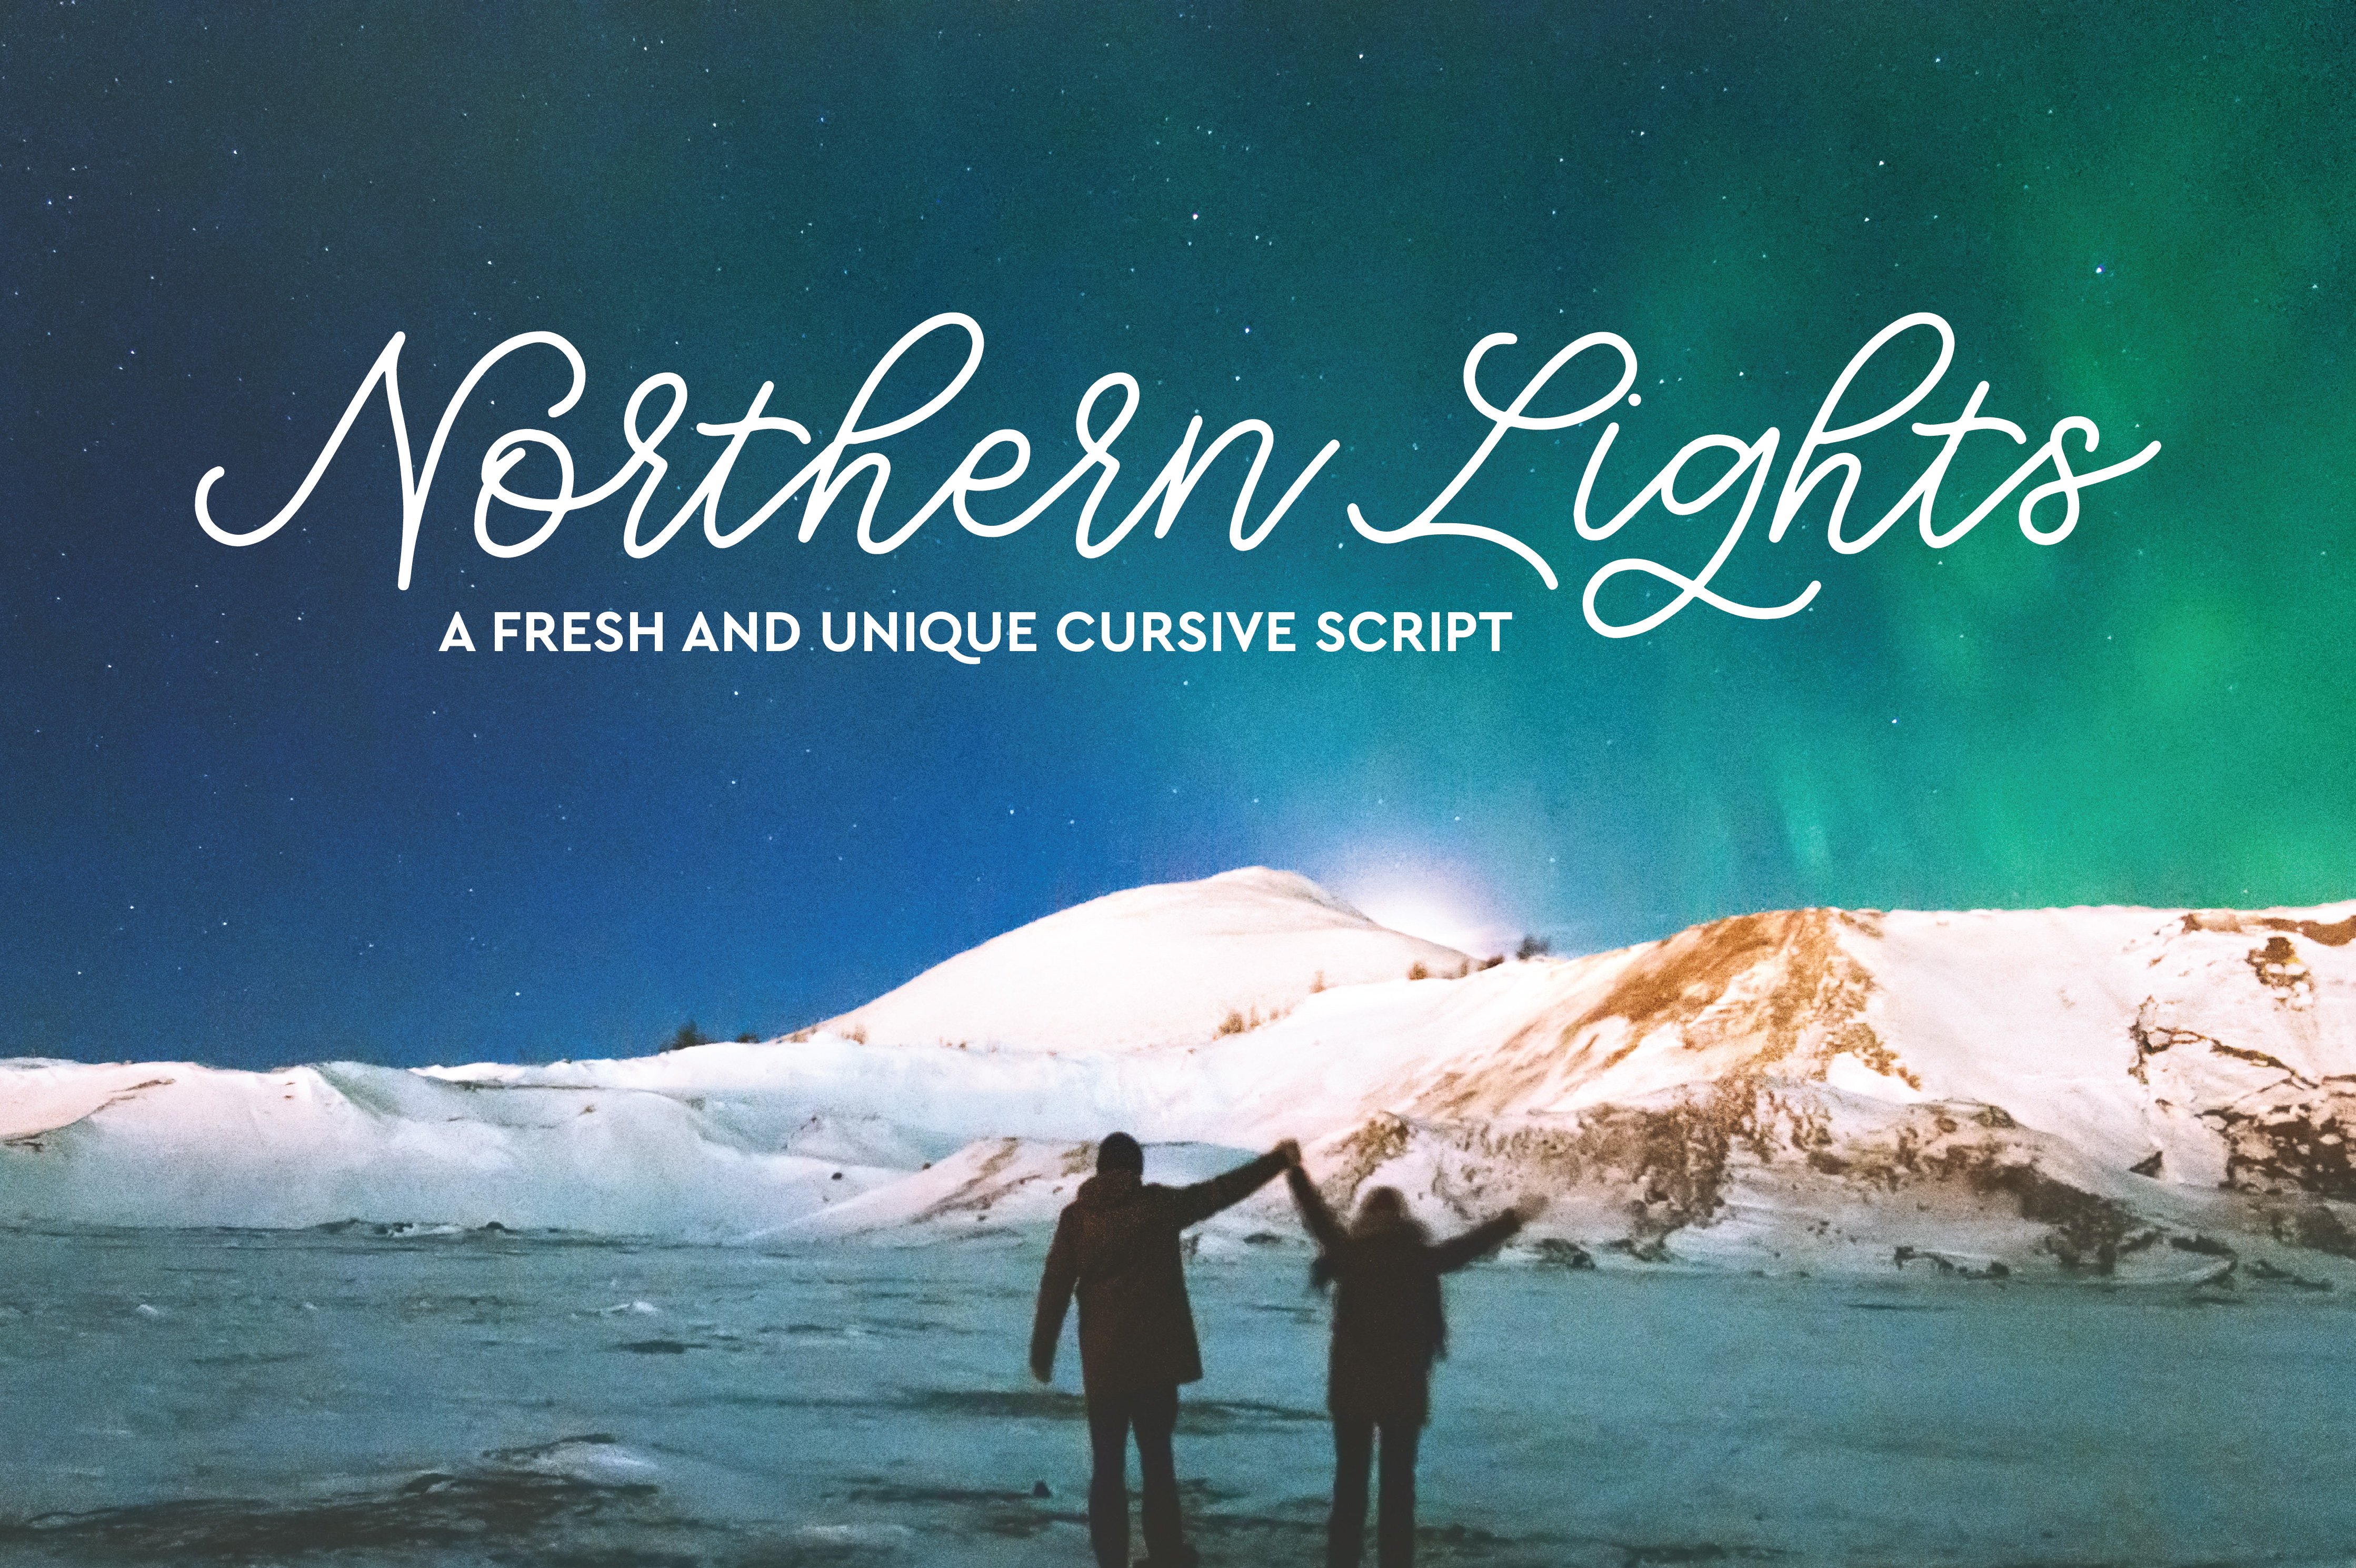 Northern Lights Script cover image.